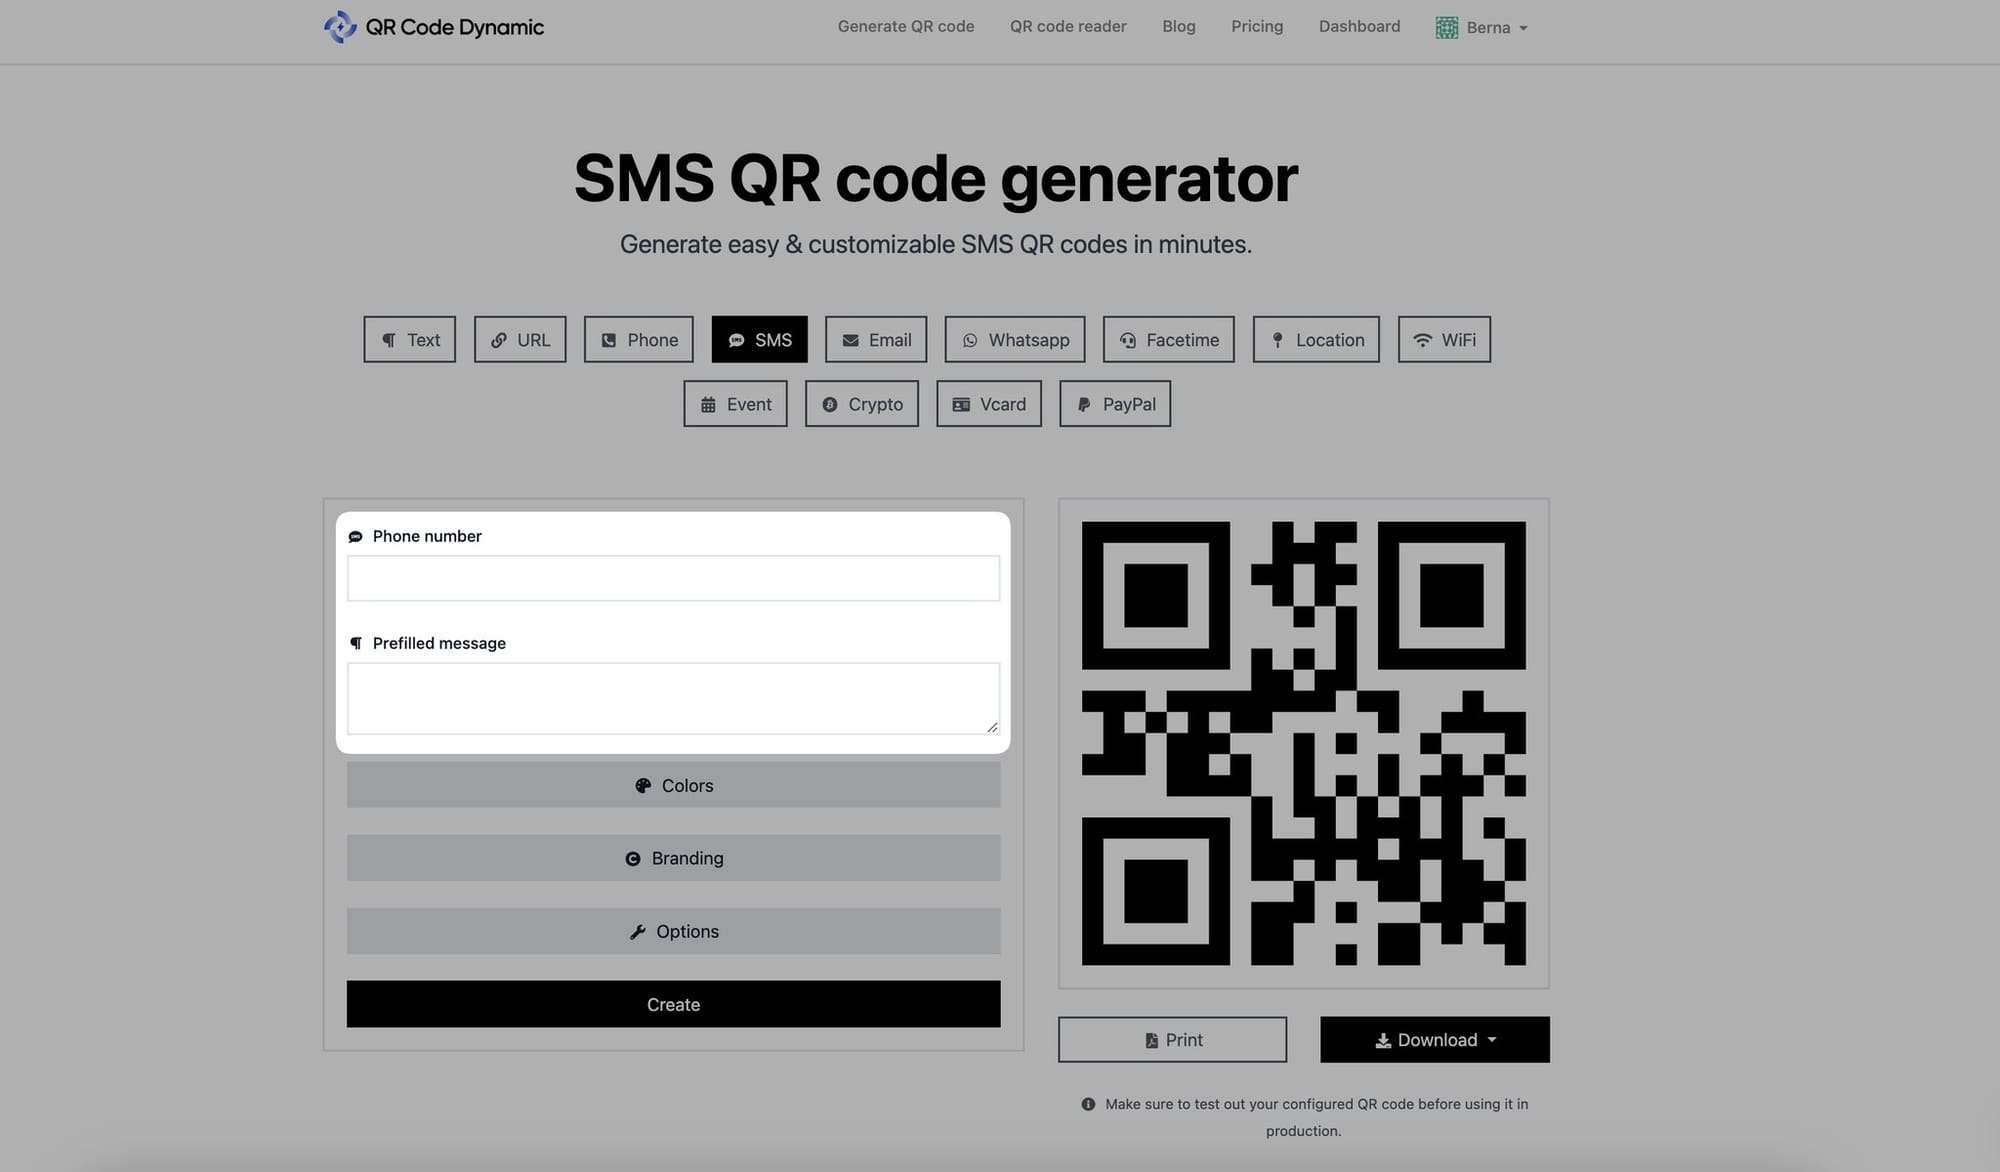 phone number and prefilled message areas of sms qr code